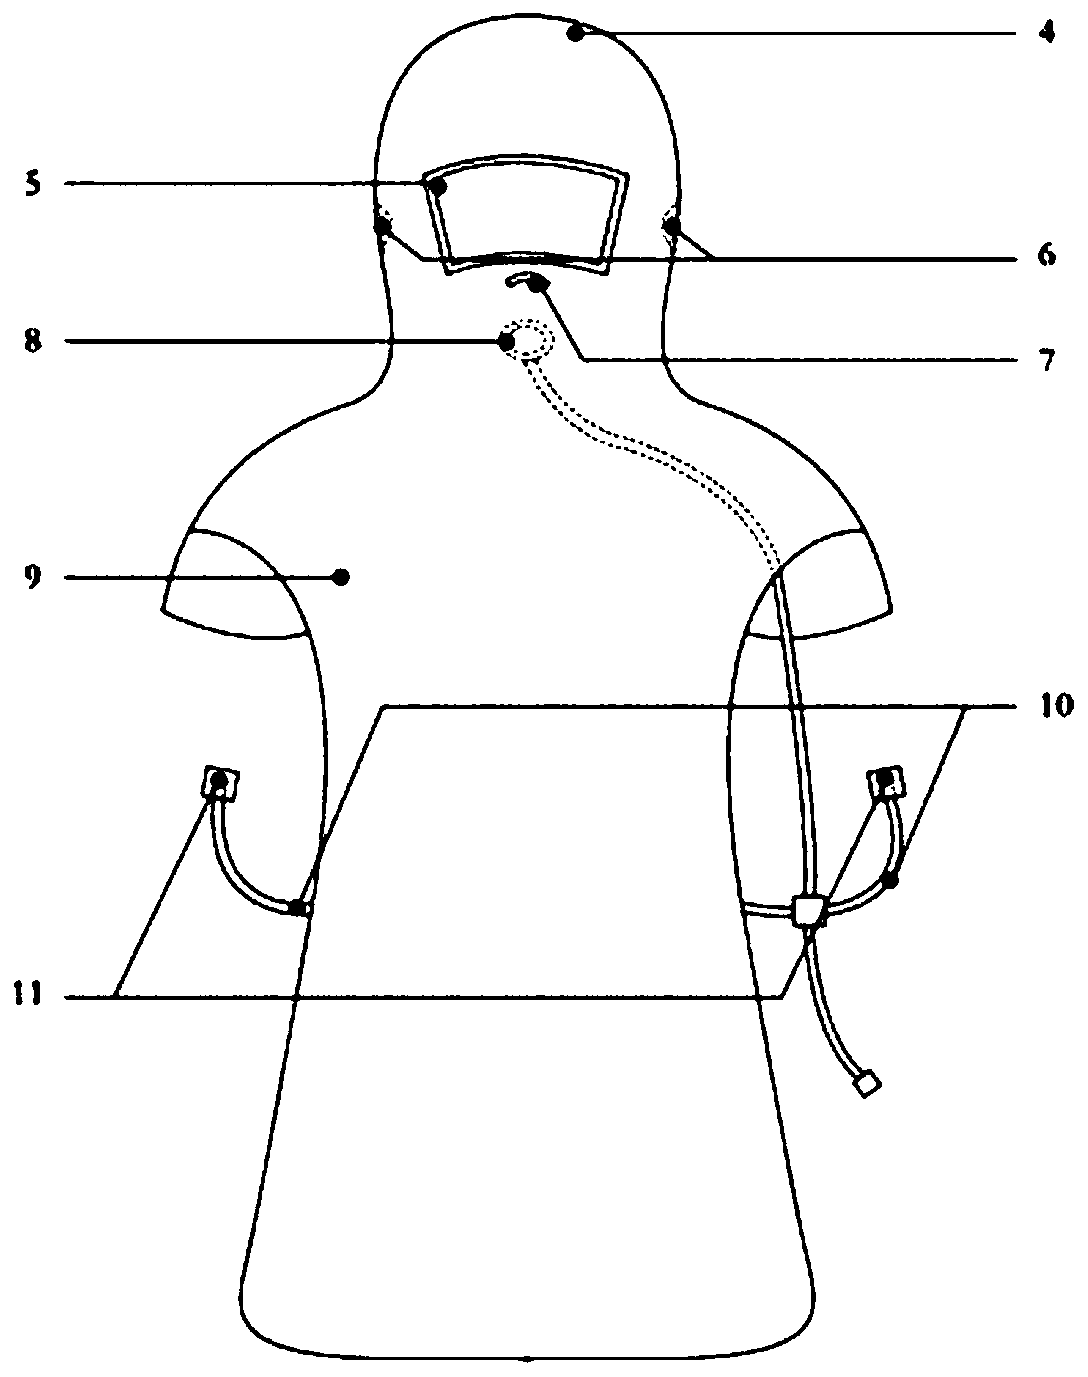 A flexible bag-type lithium battery emergency and abnormal situation handling device